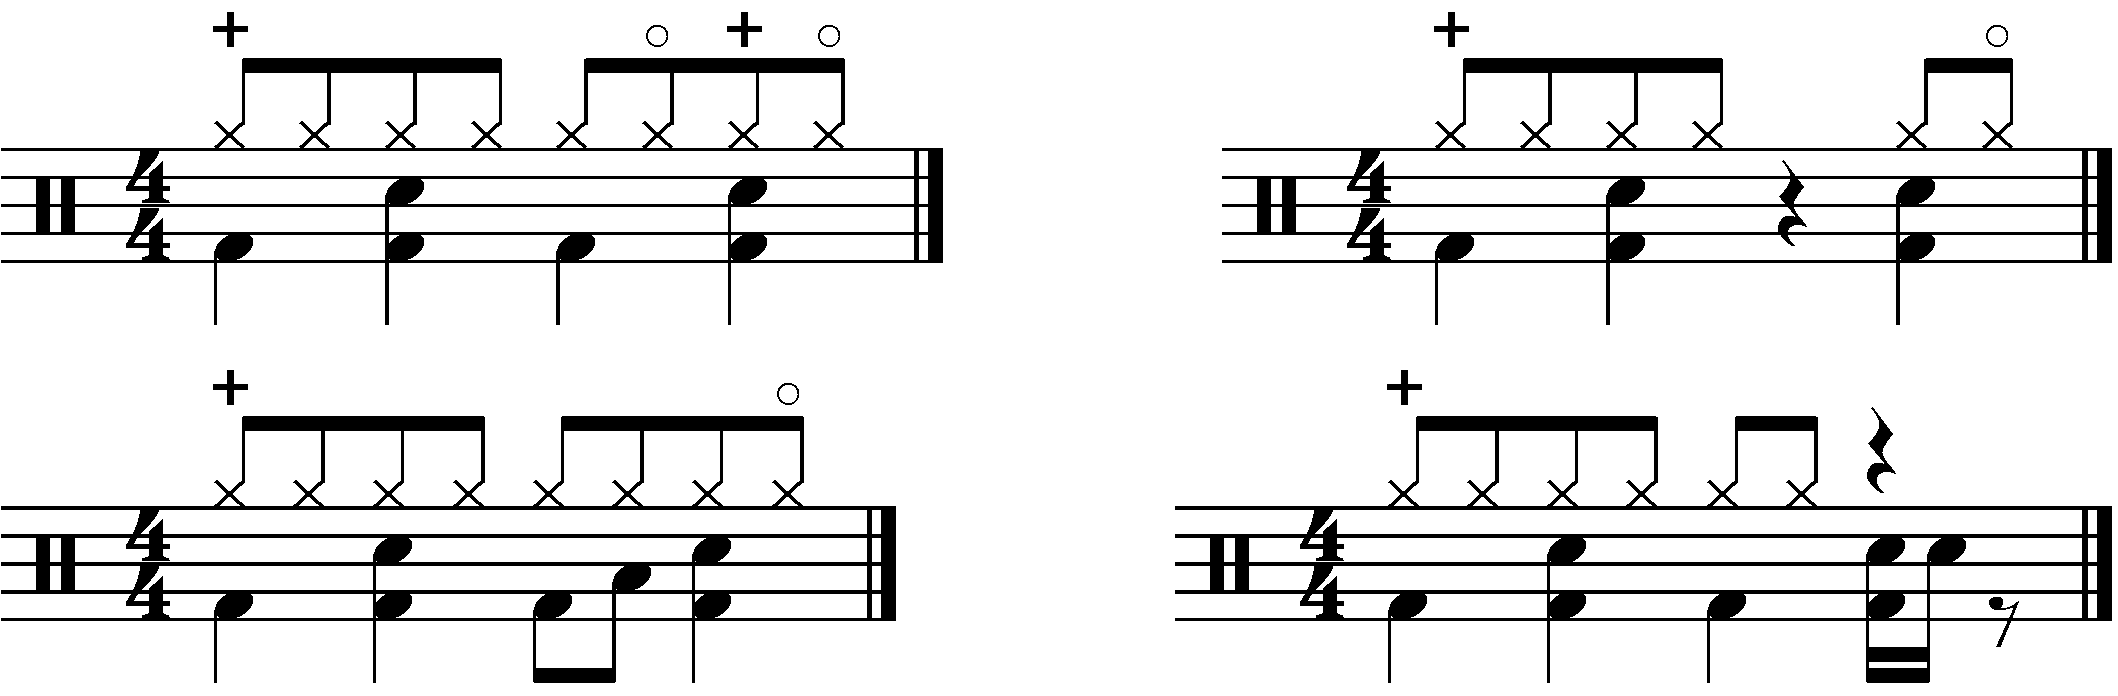 Four options for the B section